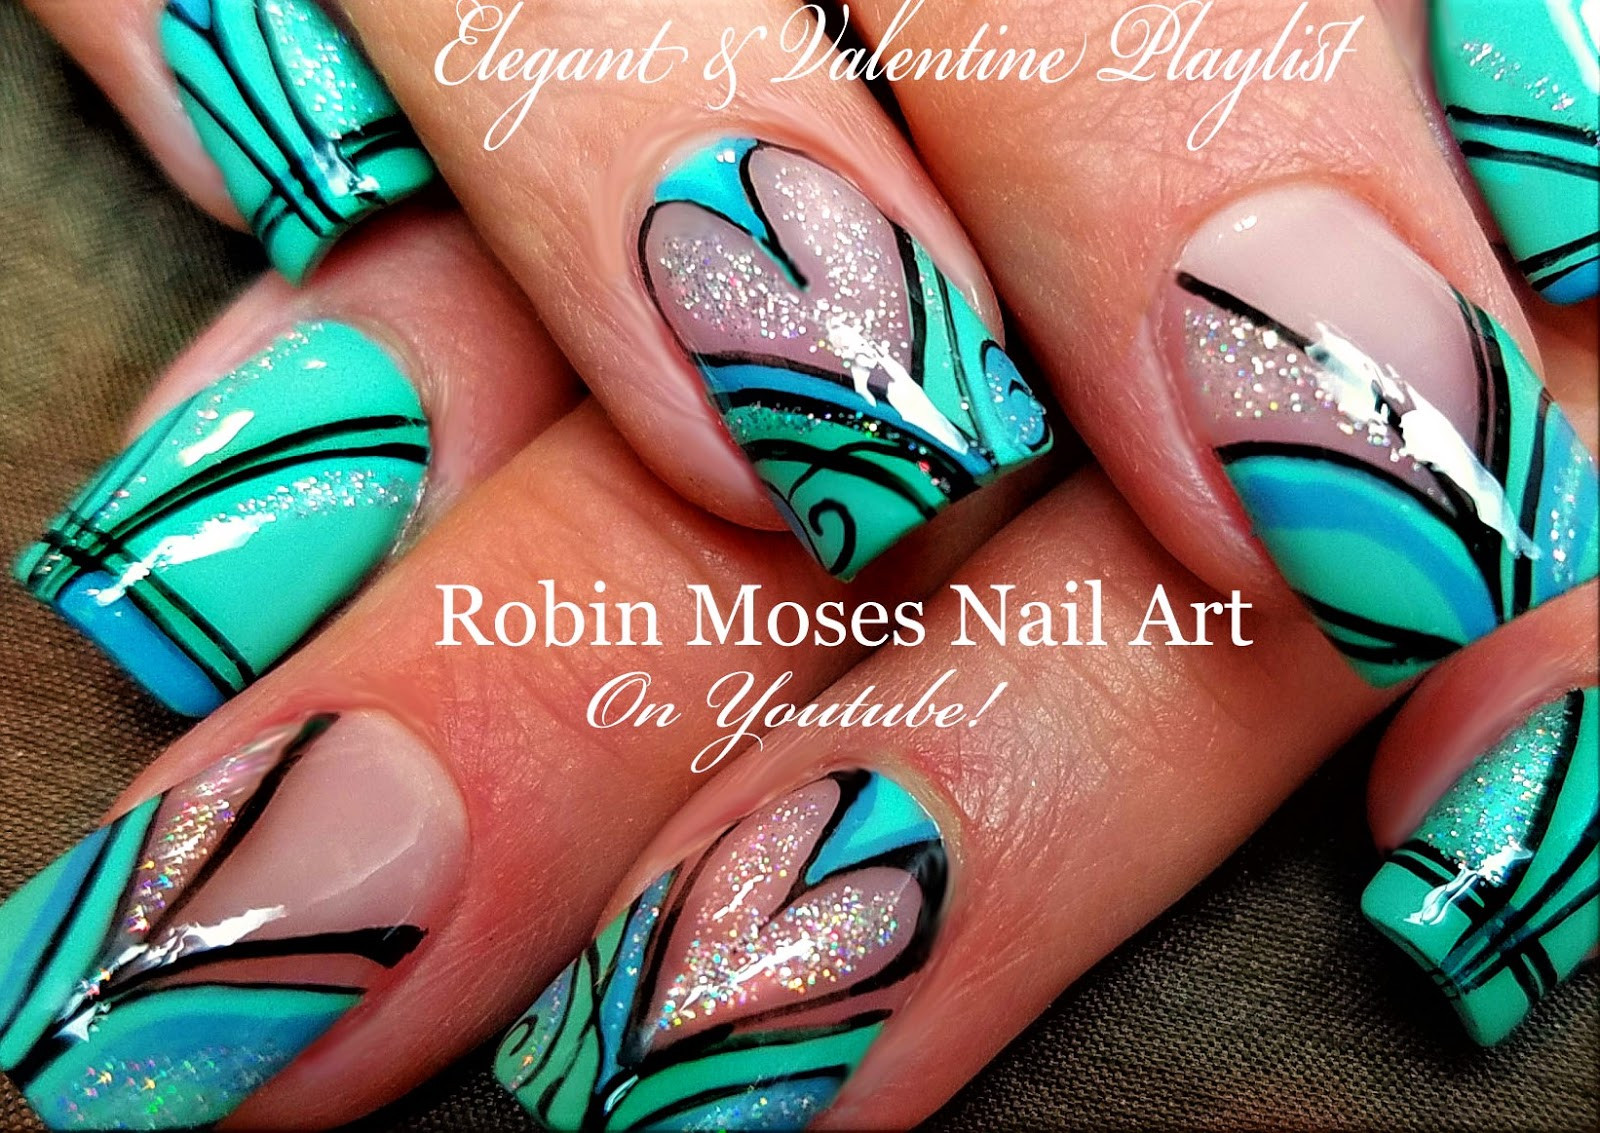 Robin Moses Nail Art Brushes for Sale on eBay - wide 5